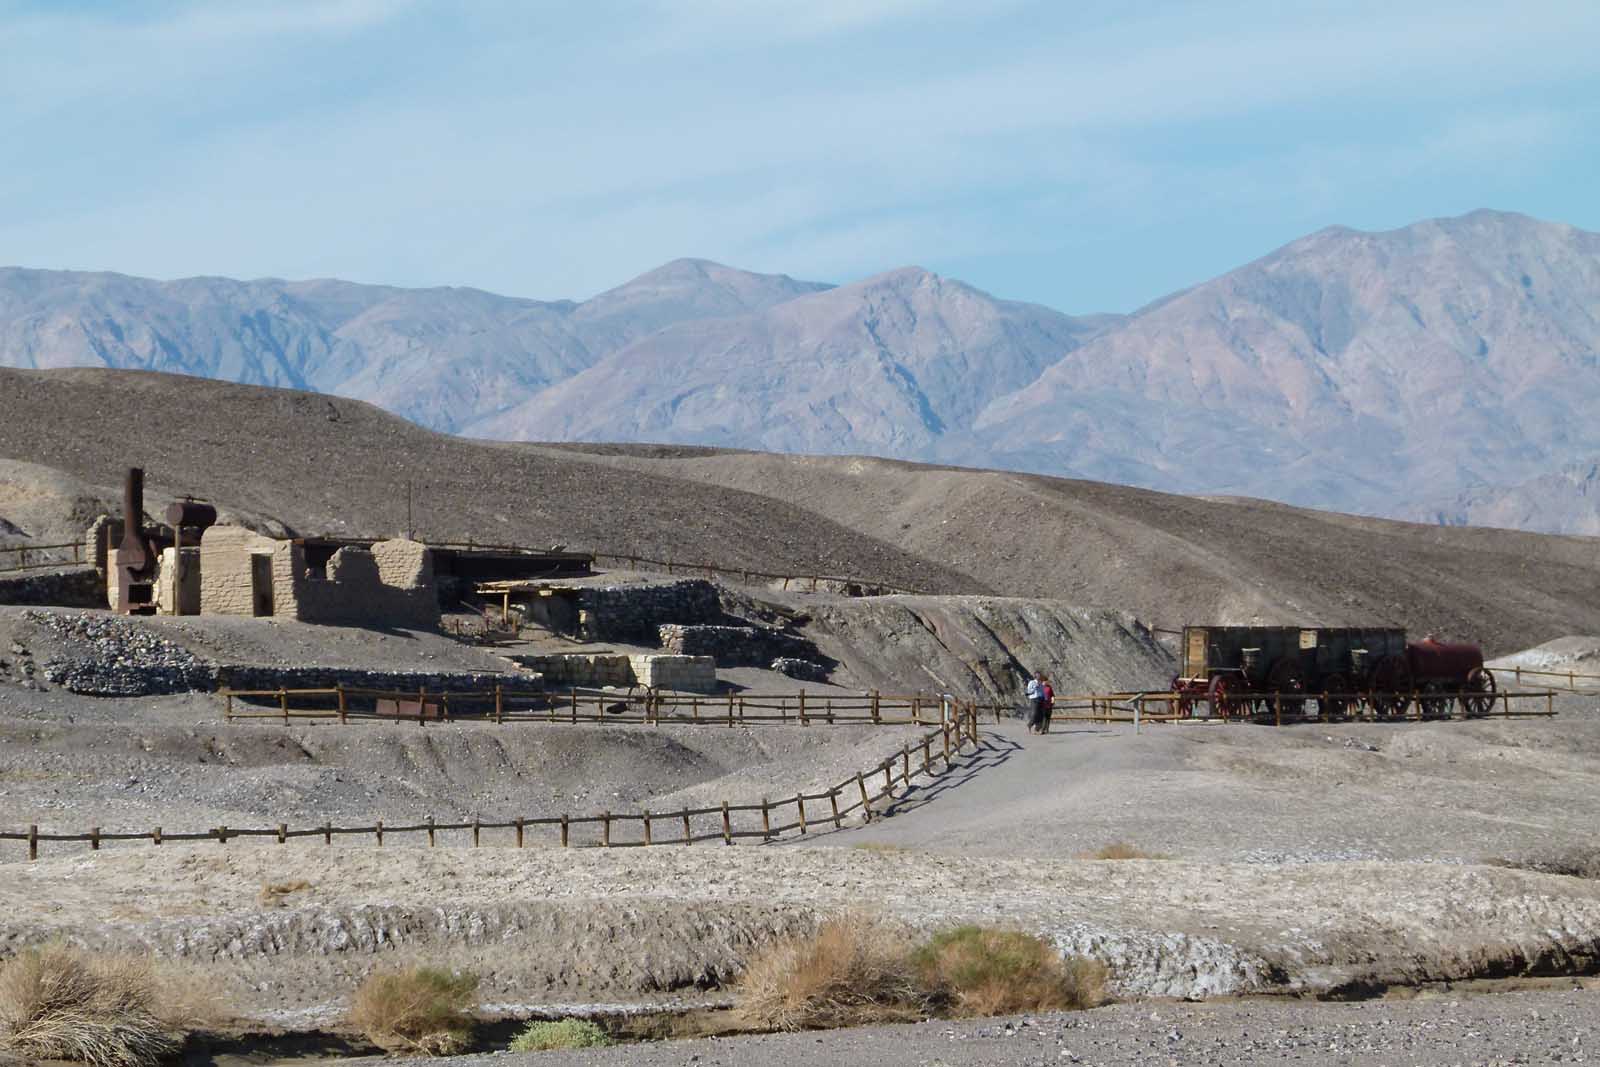 Harmony Borax Works Things to do in Death Valley National Park